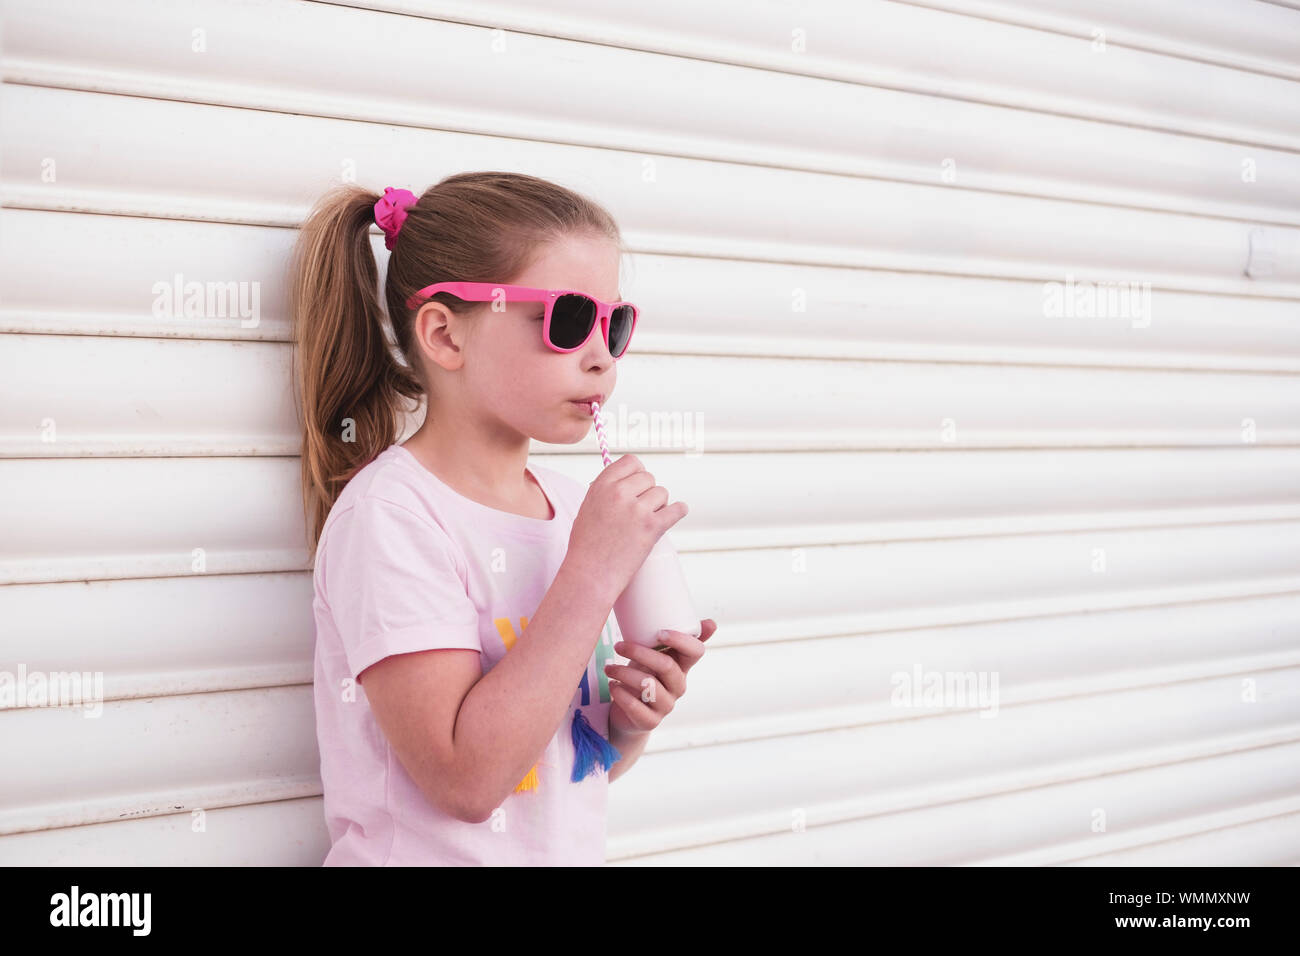 Young girl wearing pink sunglasses drinking milk through a straw Stock Photo